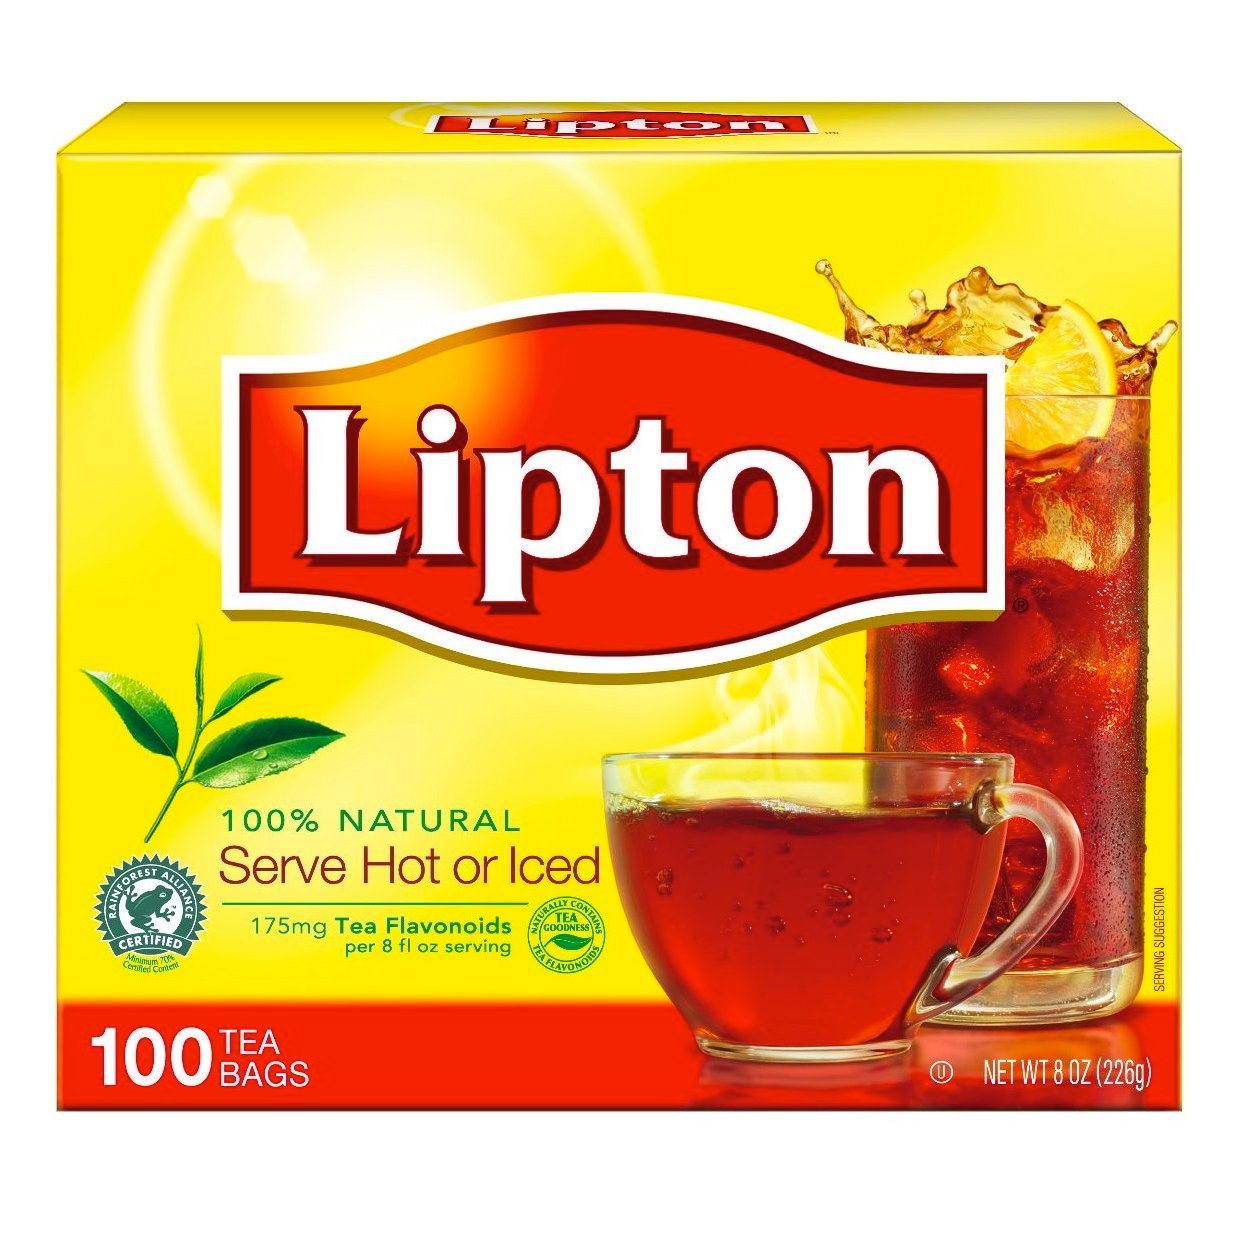 New 1/2 Lipton Tea Bags Coupon Only 0.89 at Foodtown + Lots More